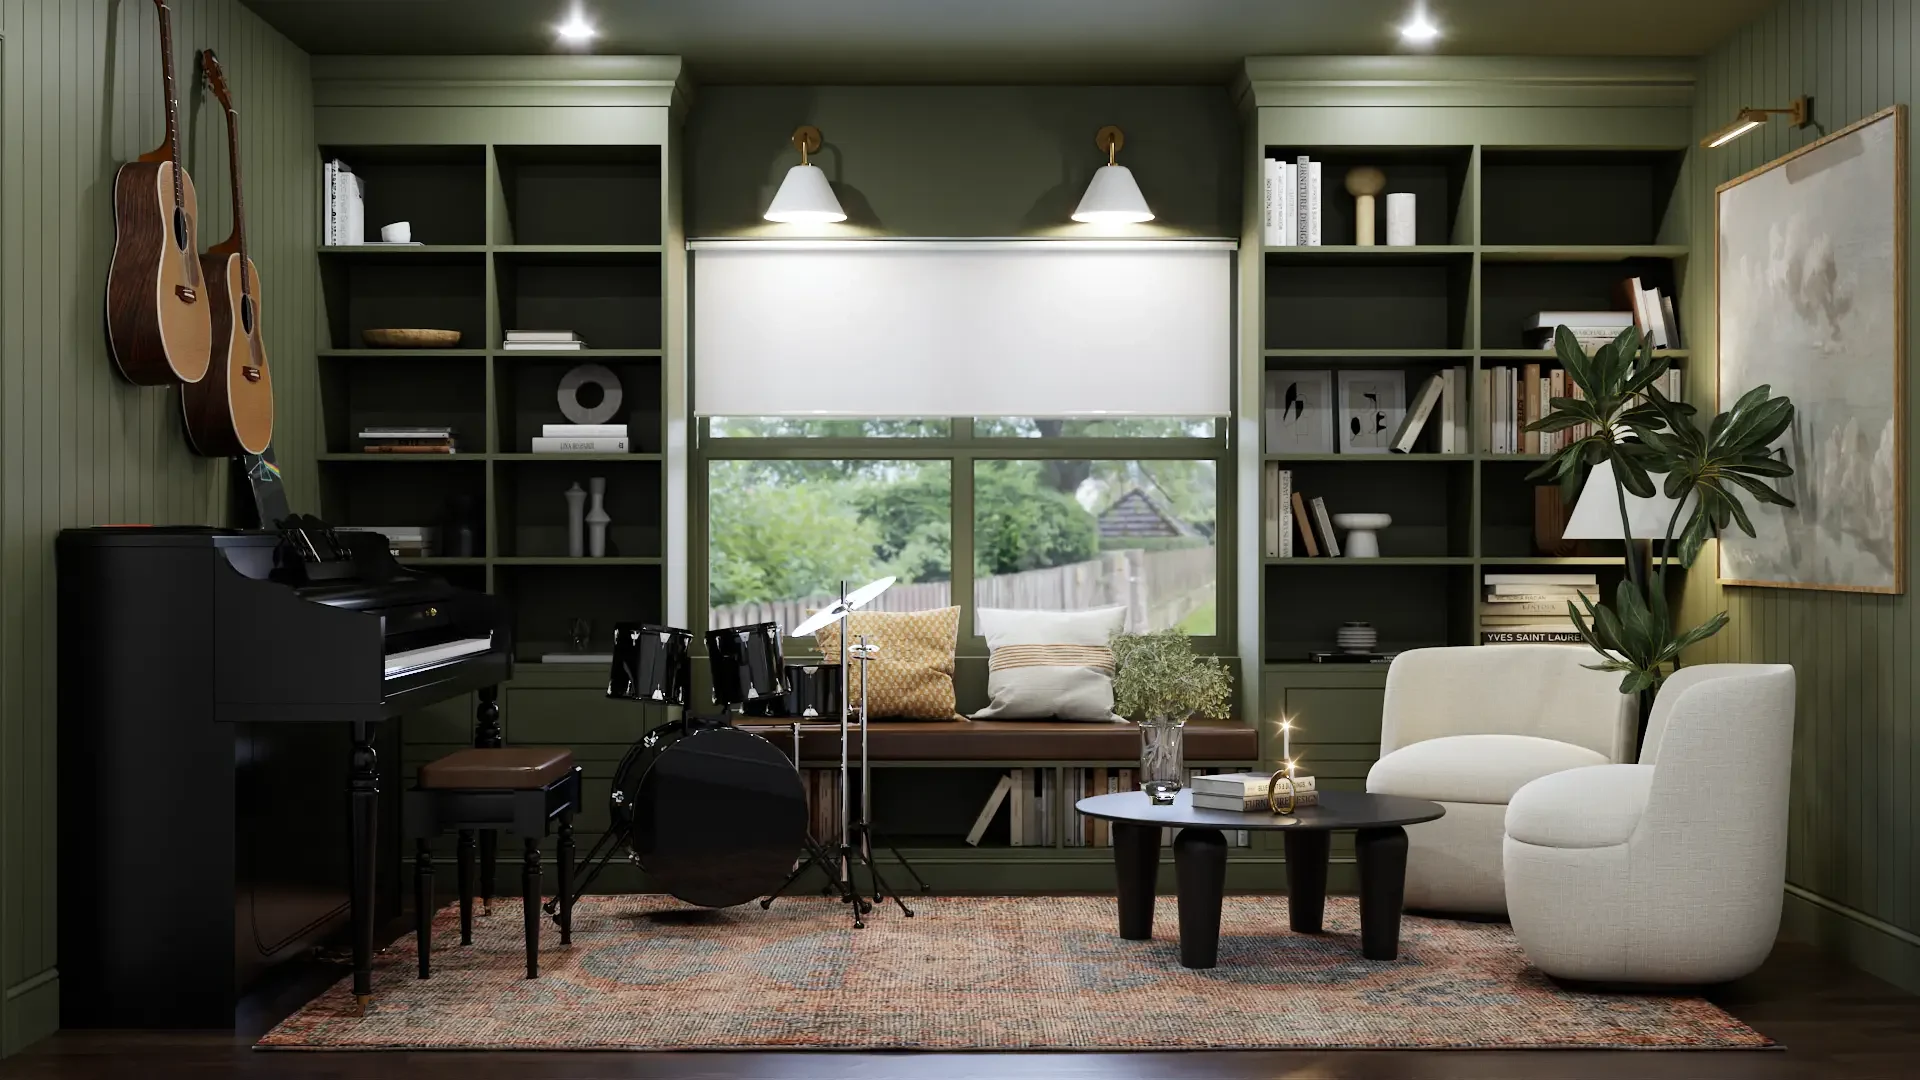 A cozy reading room with built-in green shelves filled with books and decor. A drum set and piano provide a musical touch, and a large window seat offers a comfortable spot to relax. Soft lighting enhances the warm, inviting atmosphere. Design by Debora, an online interior design service.